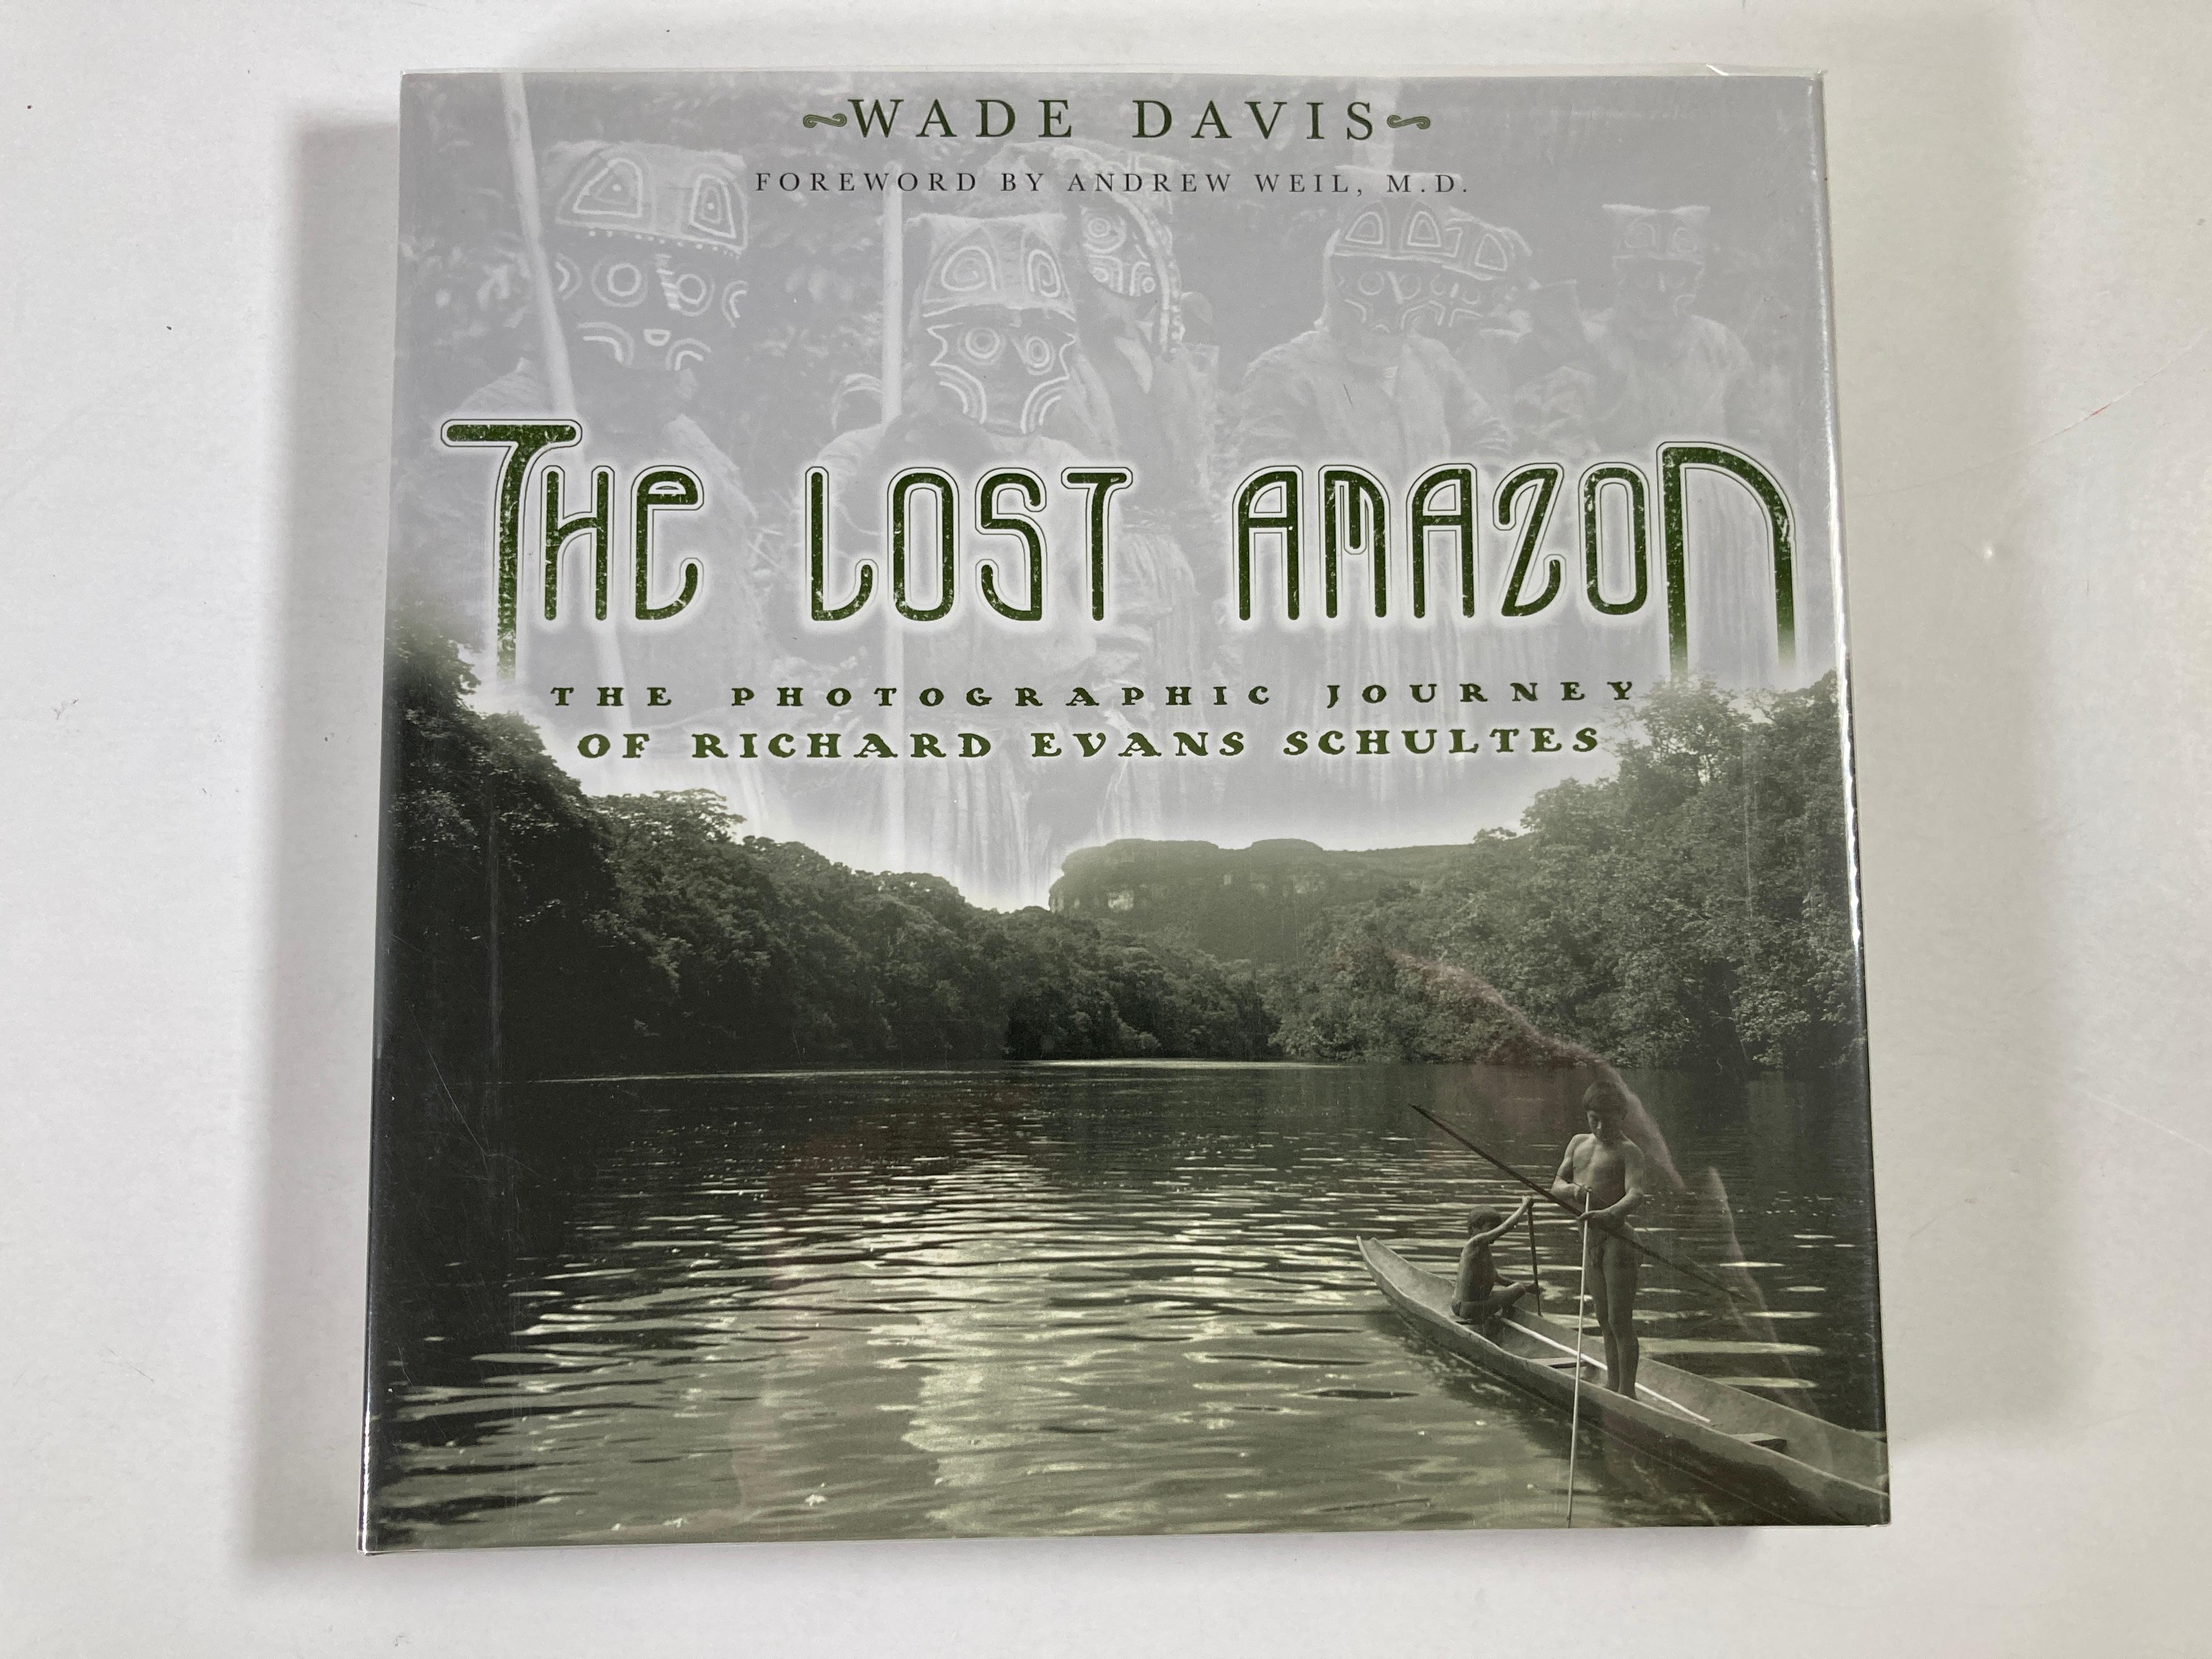 The Lost Amazon: The Photographic Journey of Richard Evans Schultes
Front Cover Wade Davis, Richard Schultes.
Richard Evans Schultes (1915-2001) was probably the greatest explorer of the Amazon, and regarded among anthropologists and seekers alike